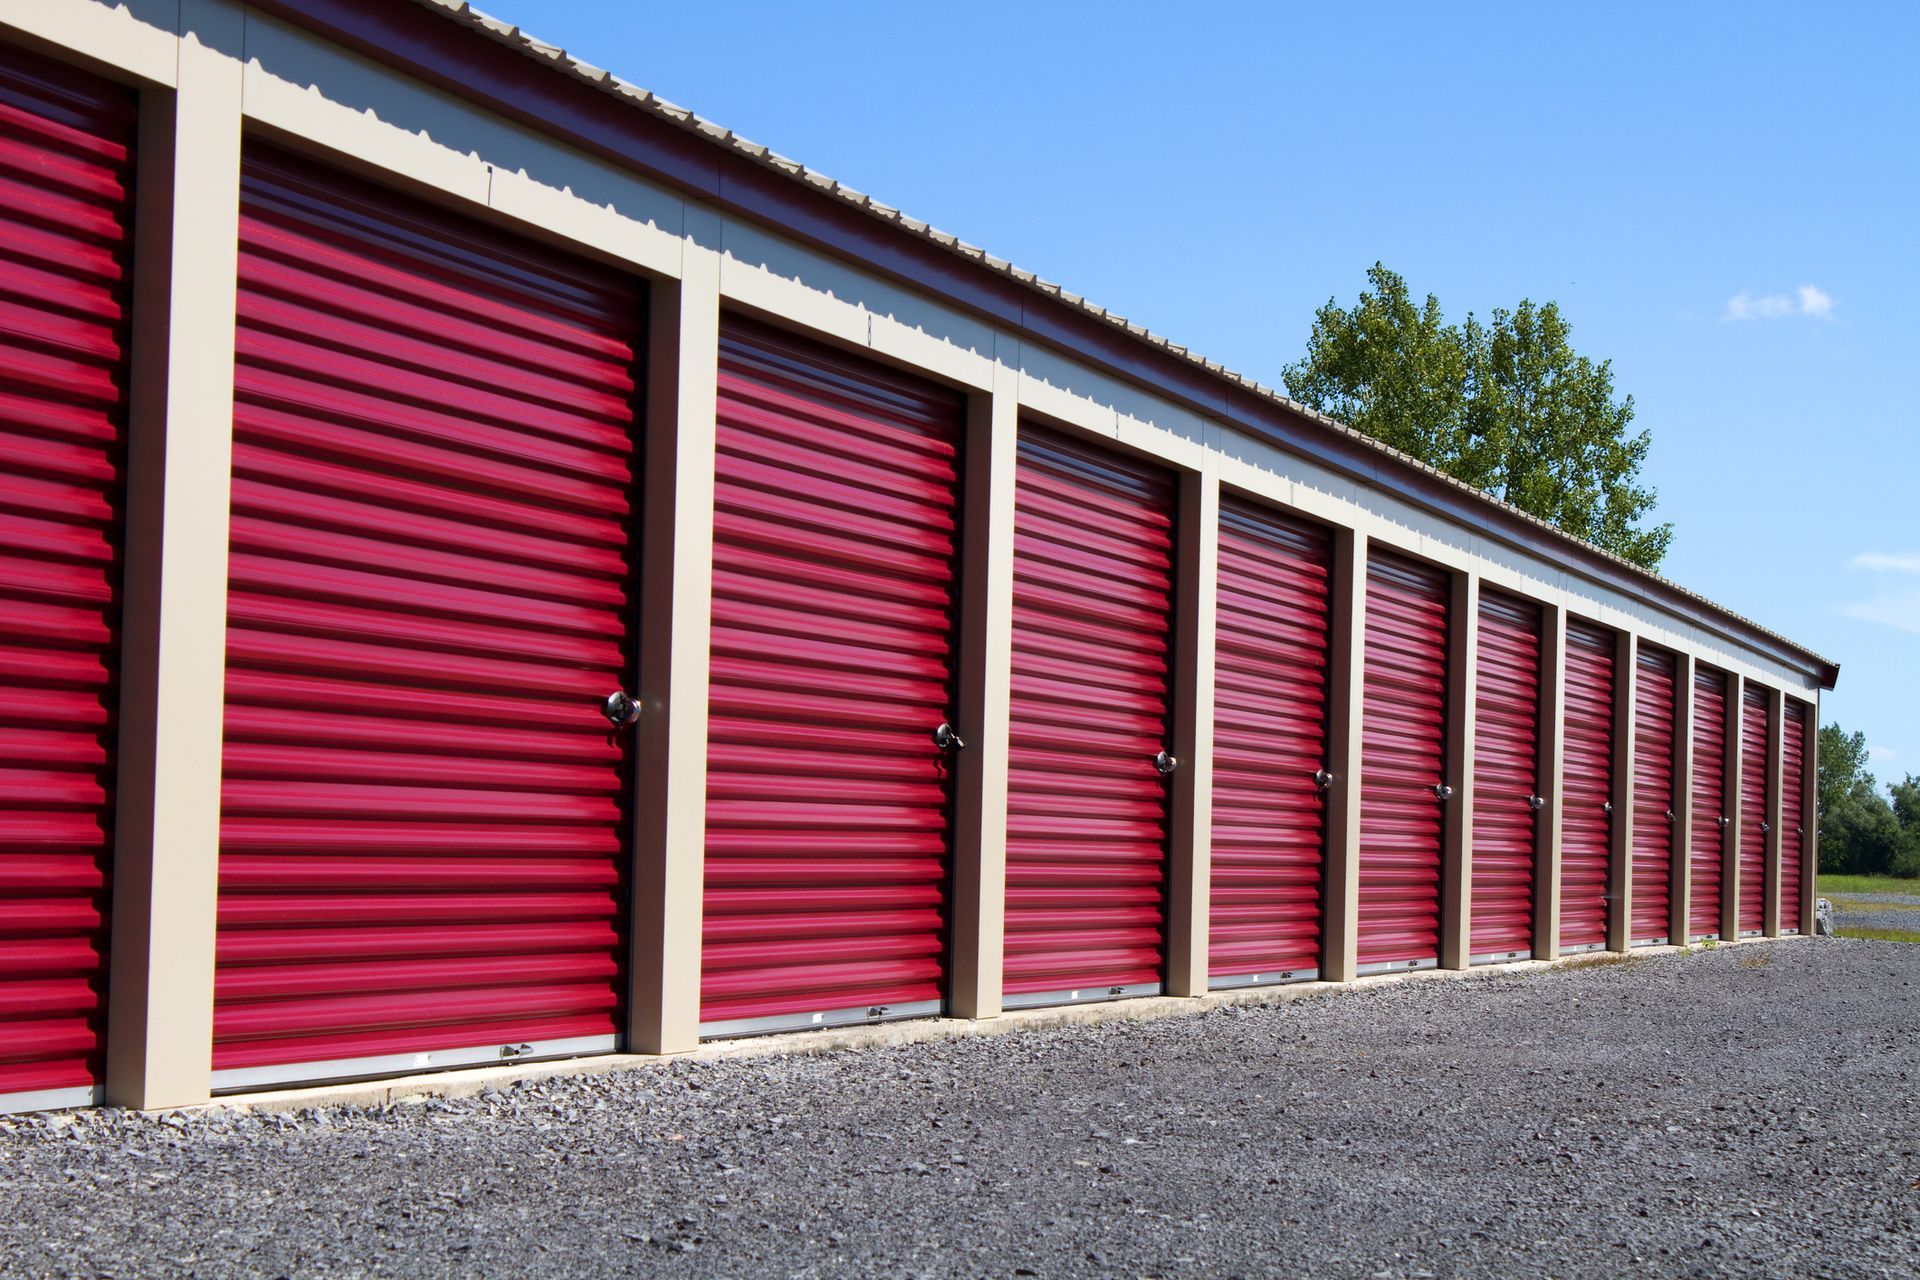 A row of red garage doors are lined up in a parking lot.